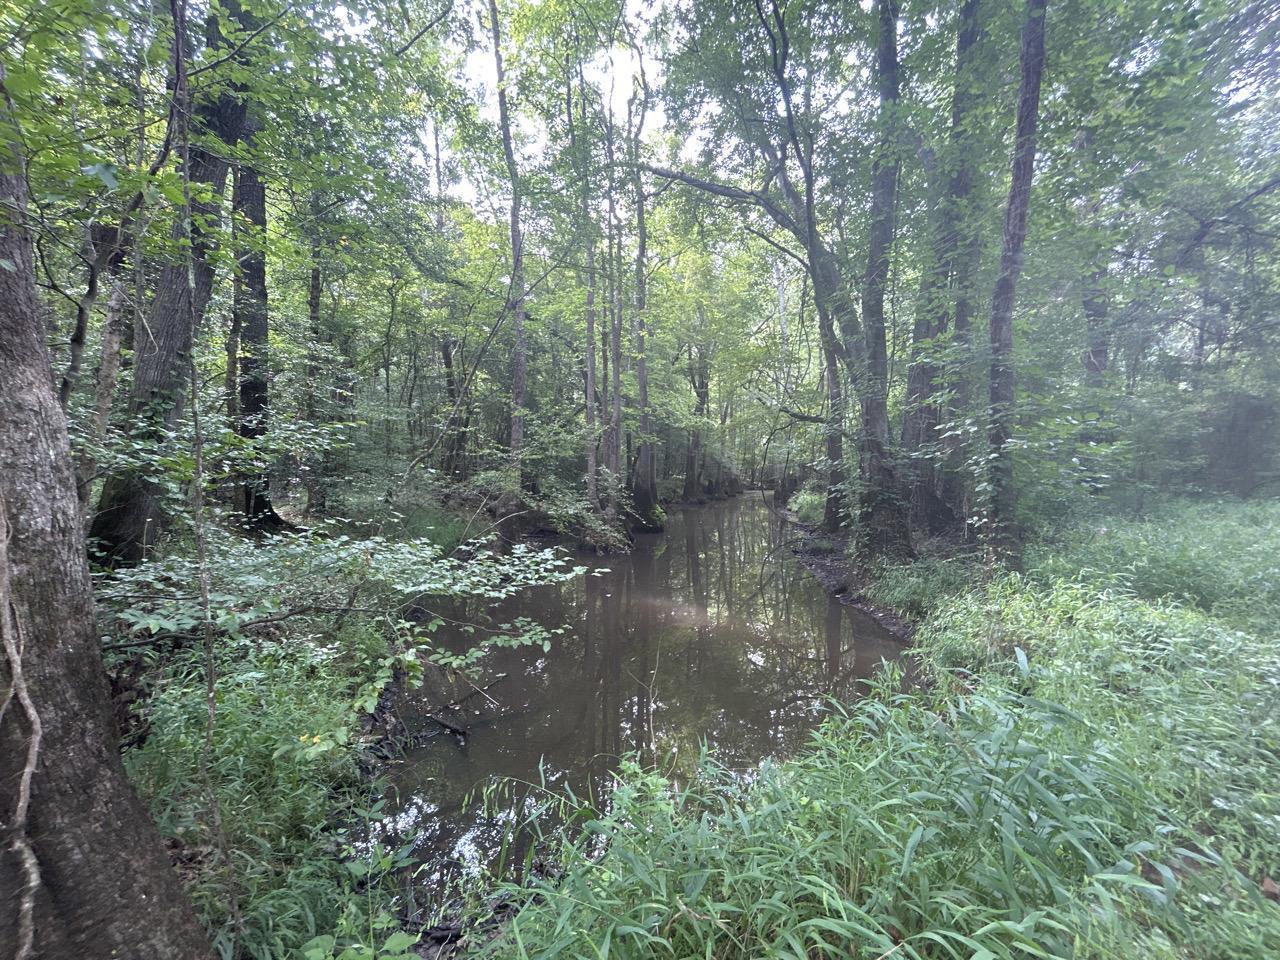 VOF, Enviva partner to conserve 2,808 acres in Greensville County